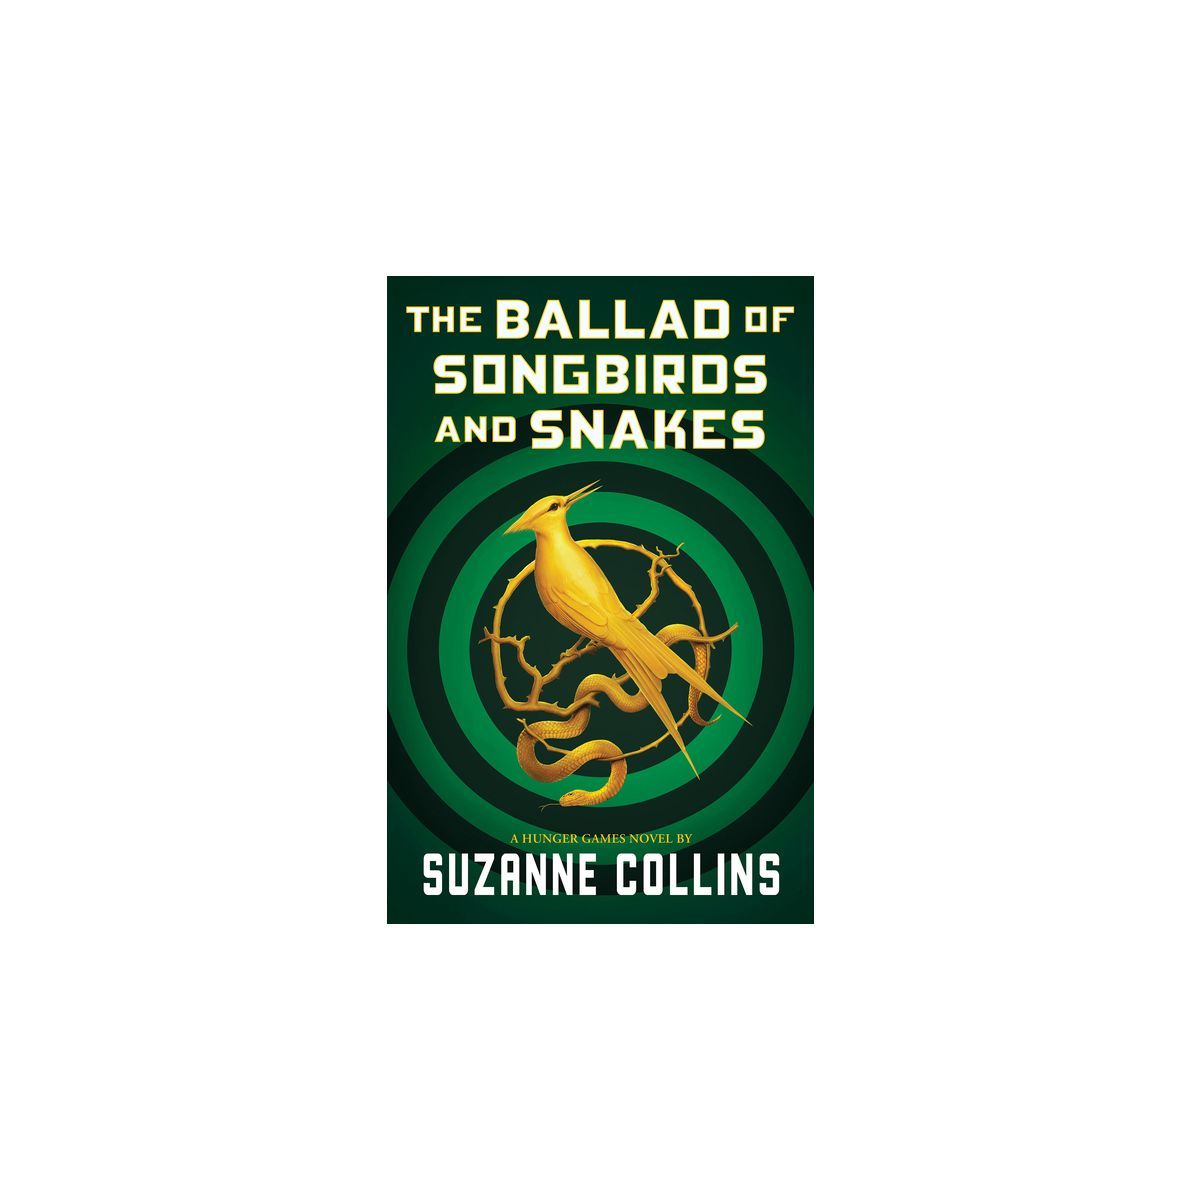 The Ballad of Songbirds and Snakes (A Hunger Games Novel) - by Suzanne Collins (Hardcover) | Target